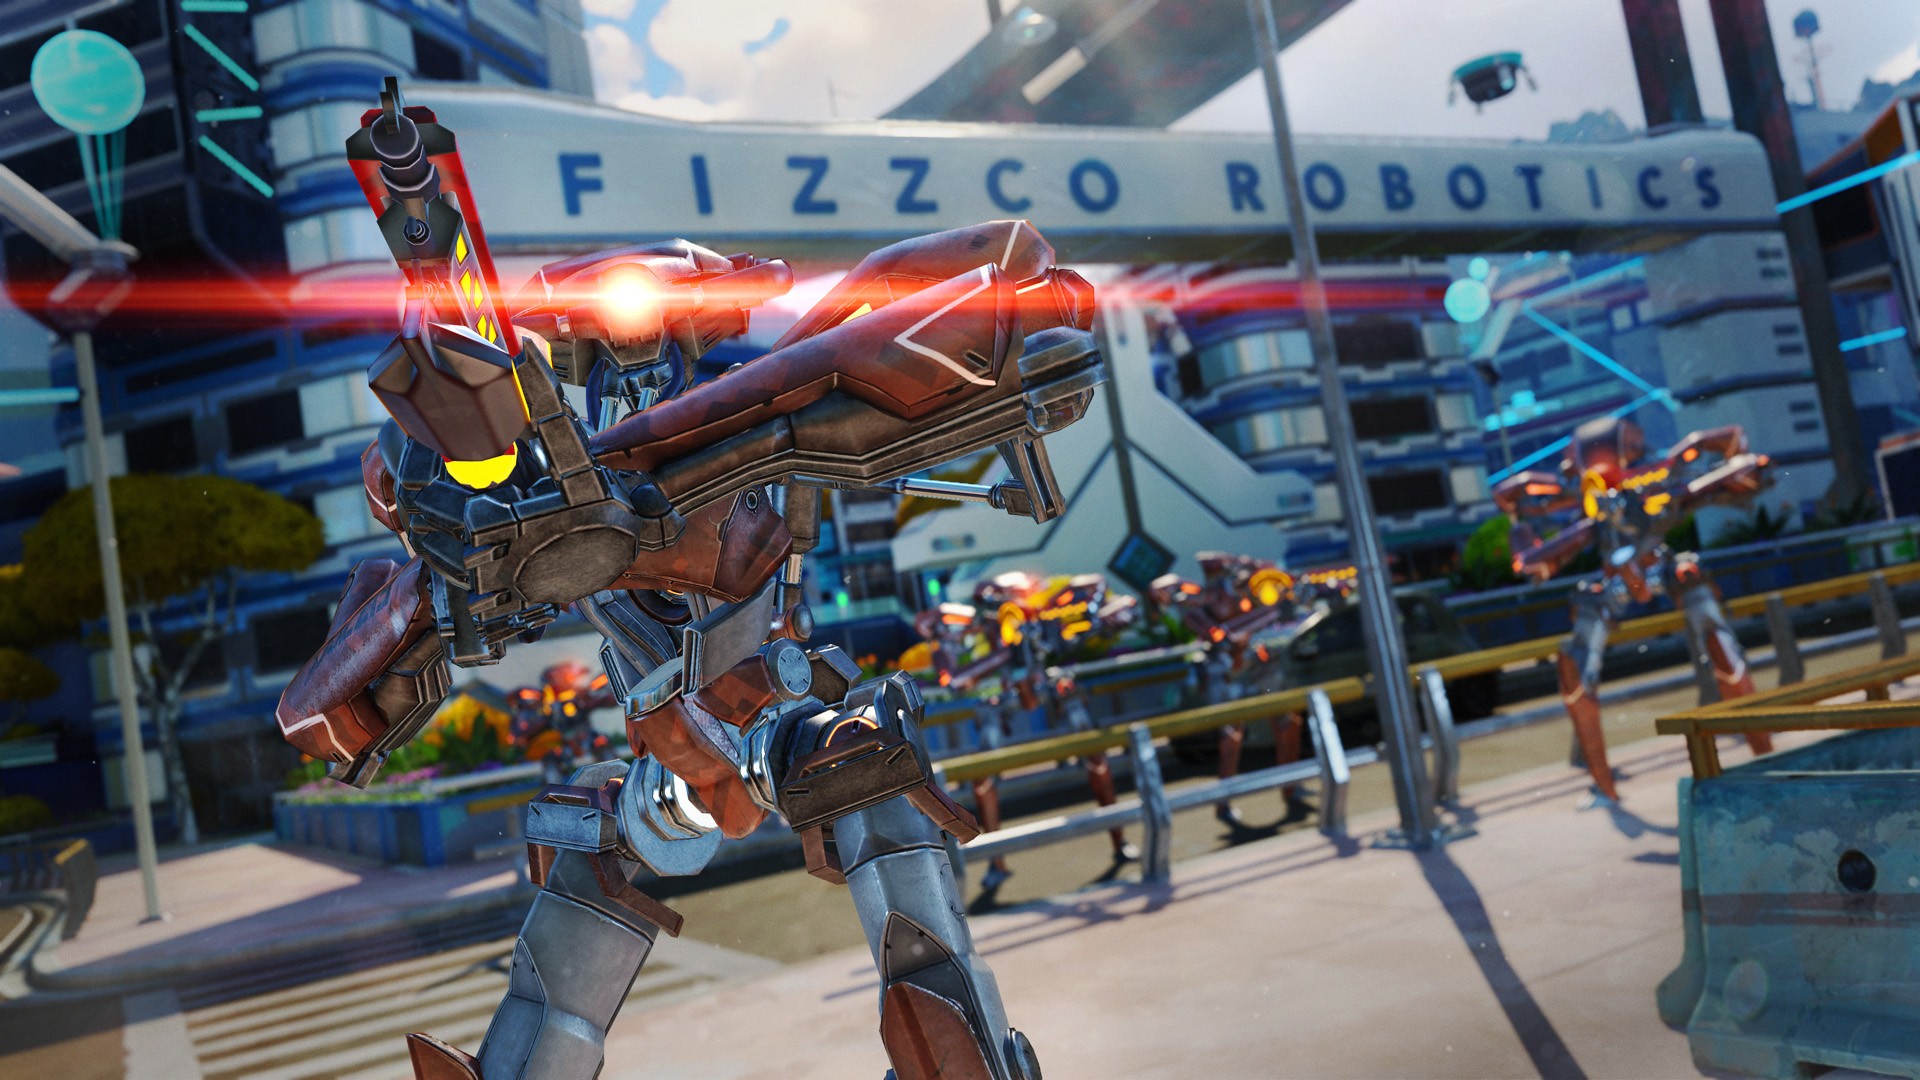 Insomniac games releases new trailer for Sunset Overdrive DLC